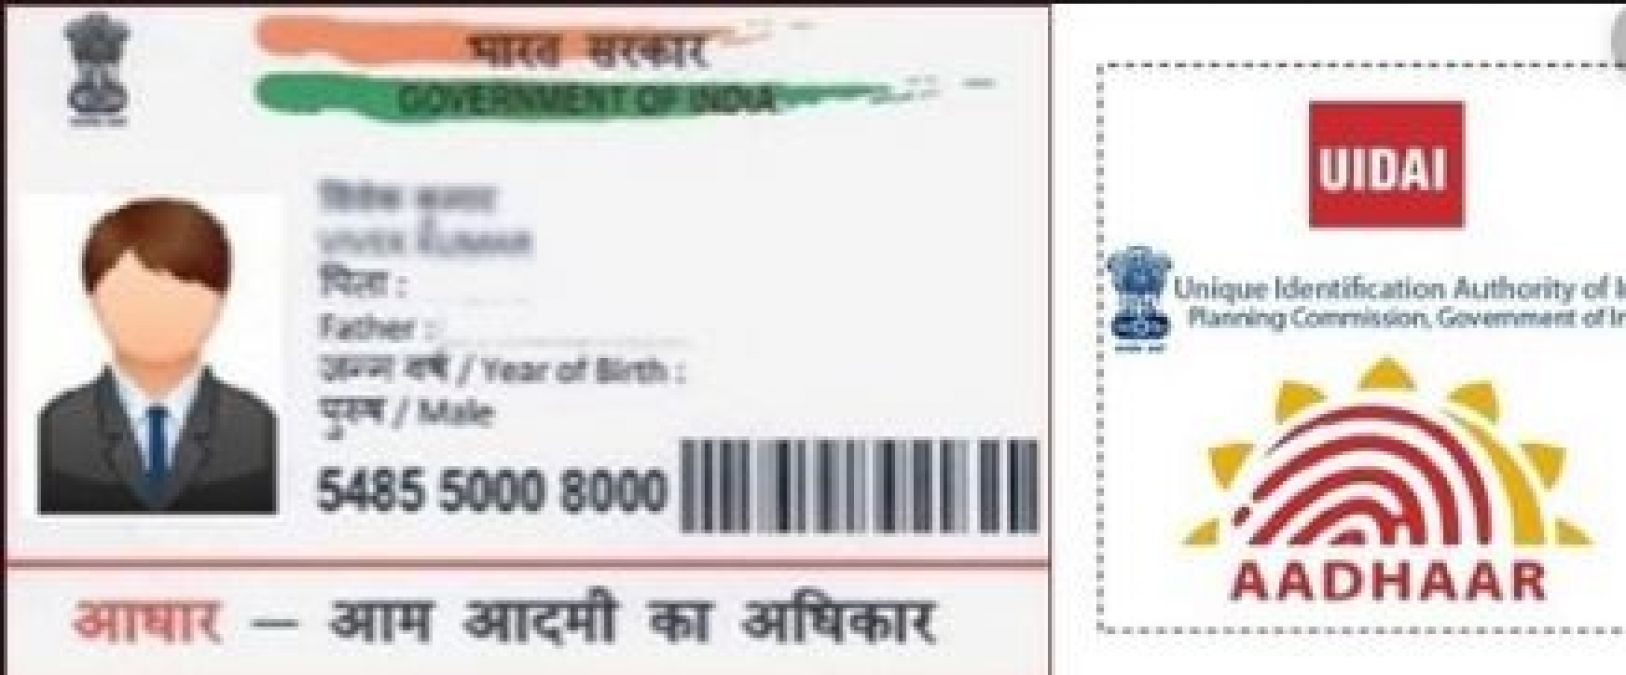 In this way, you can know your Aadhaar card details